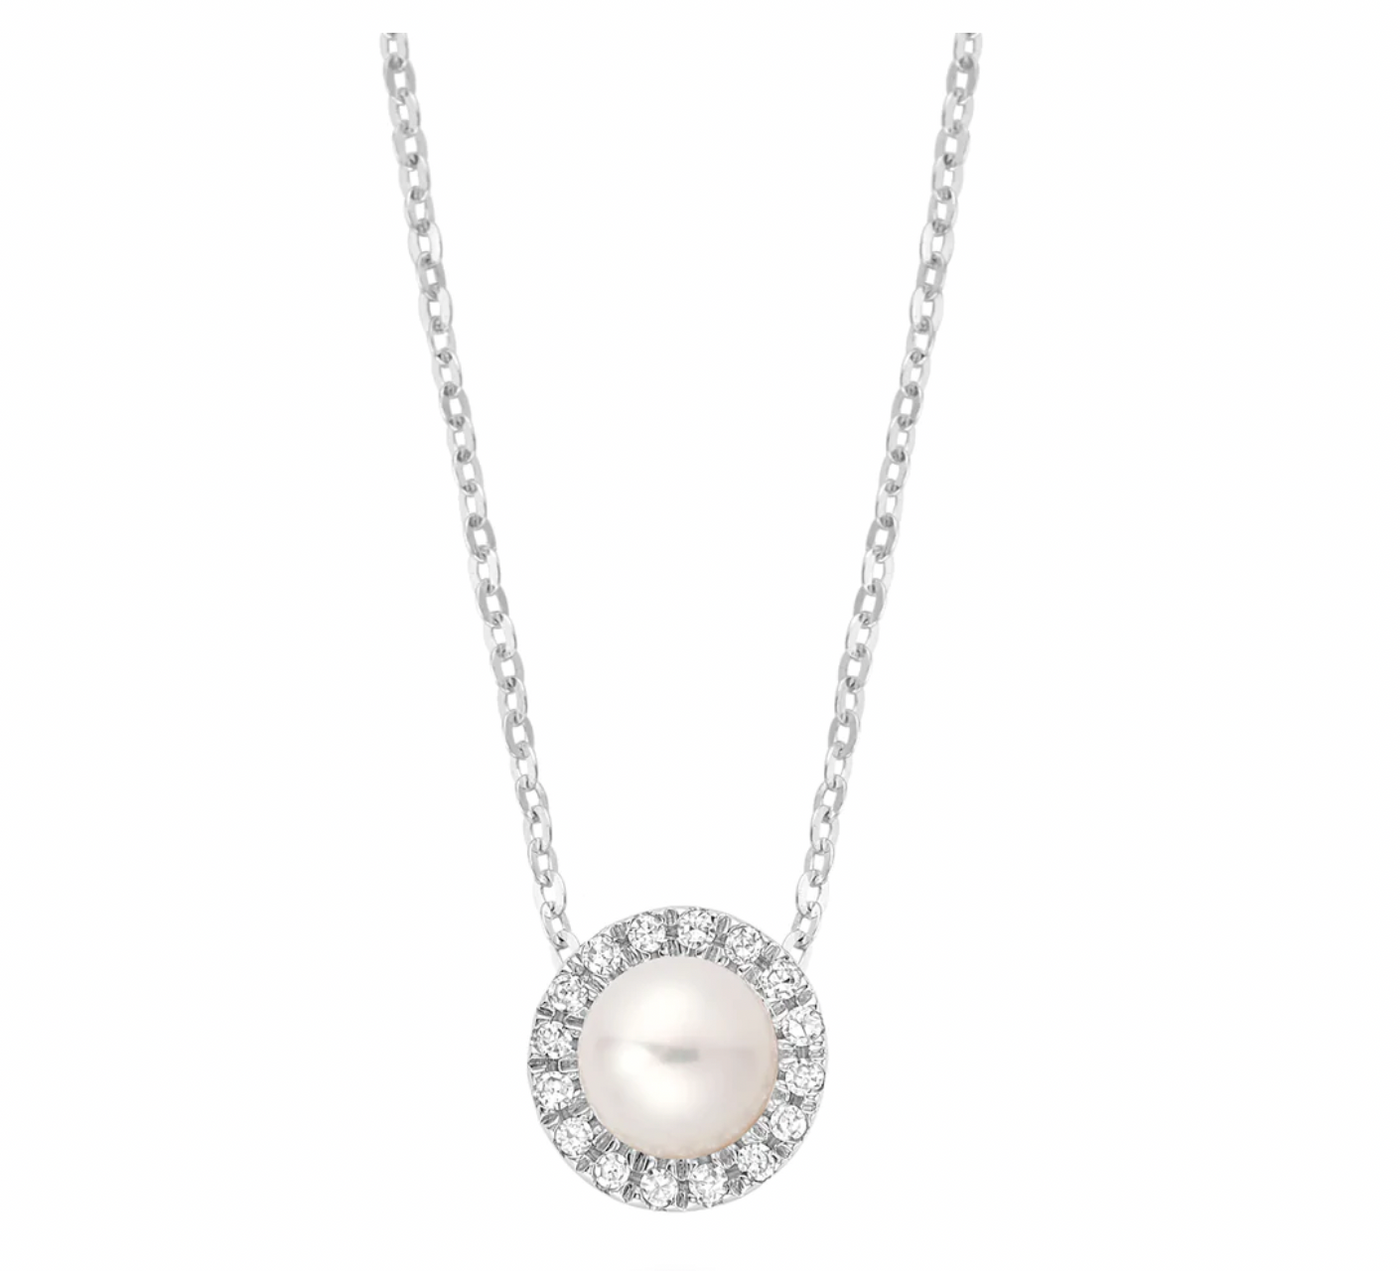 10 Karat White Gold Pearl and Diamond Necklace